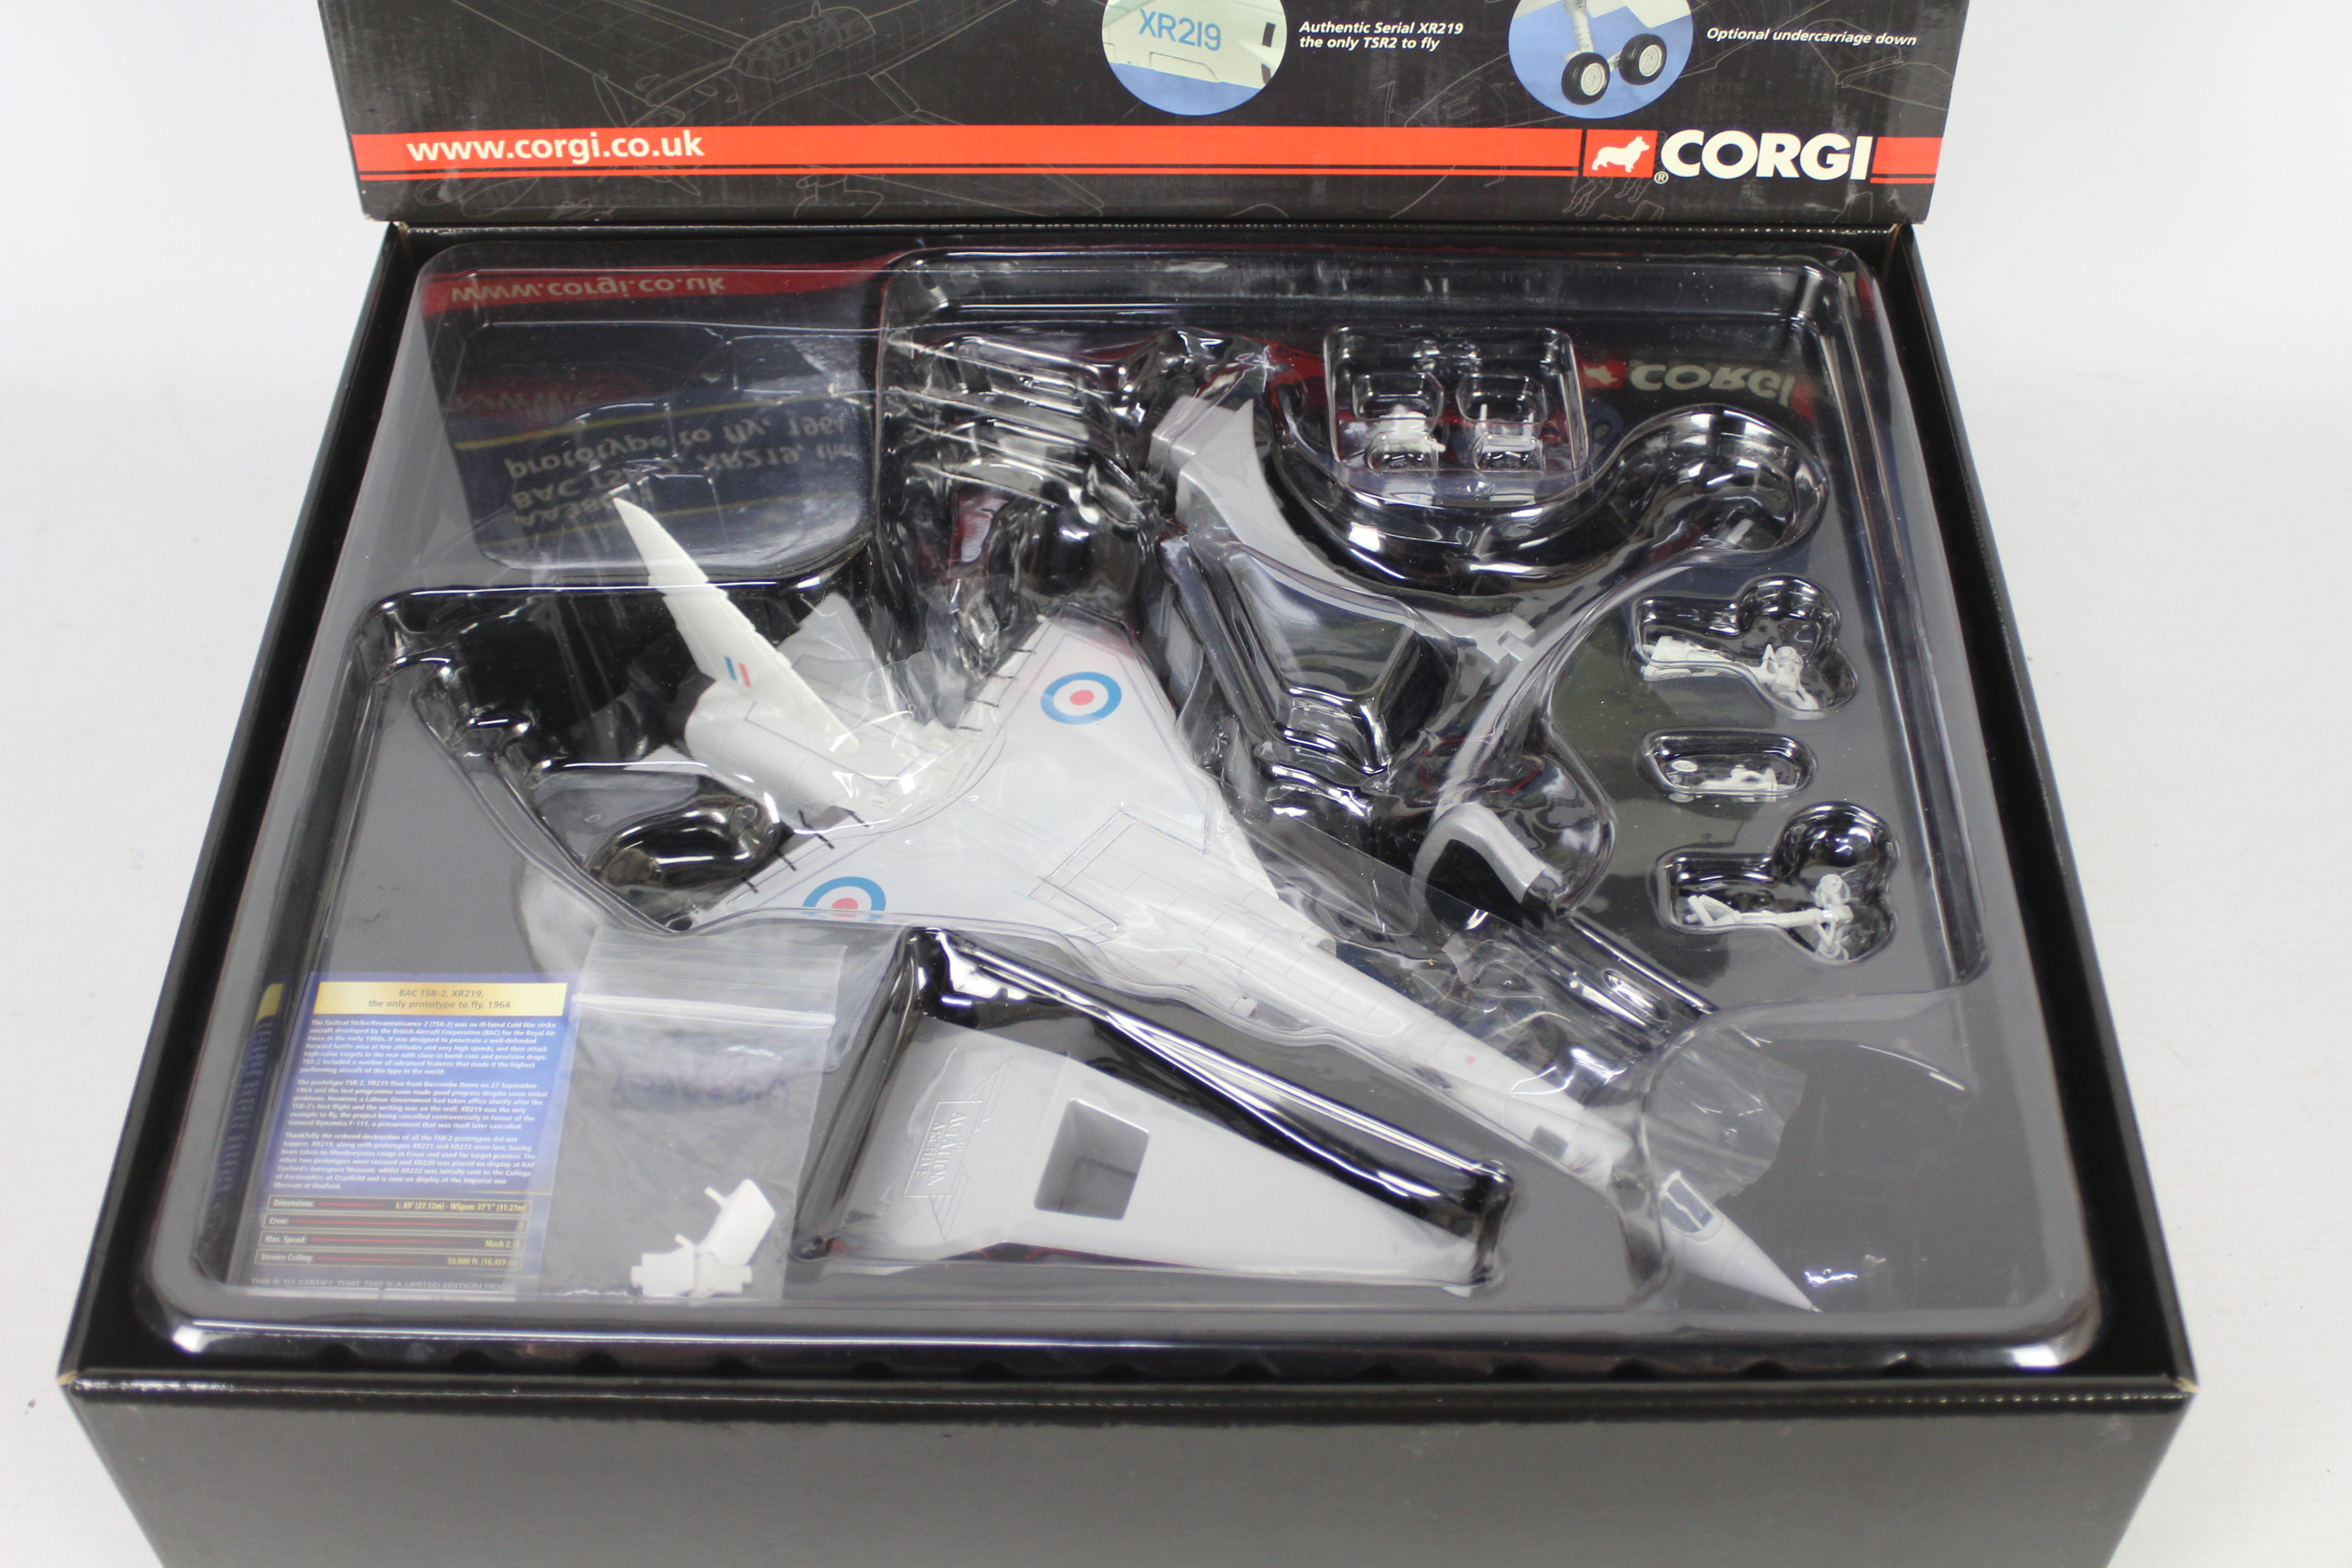 Corgi Aviation Archive - A boxed Limited Edition 1:72 scale AA38601 BAC TSR-2 XR219. - Image 8 of 9